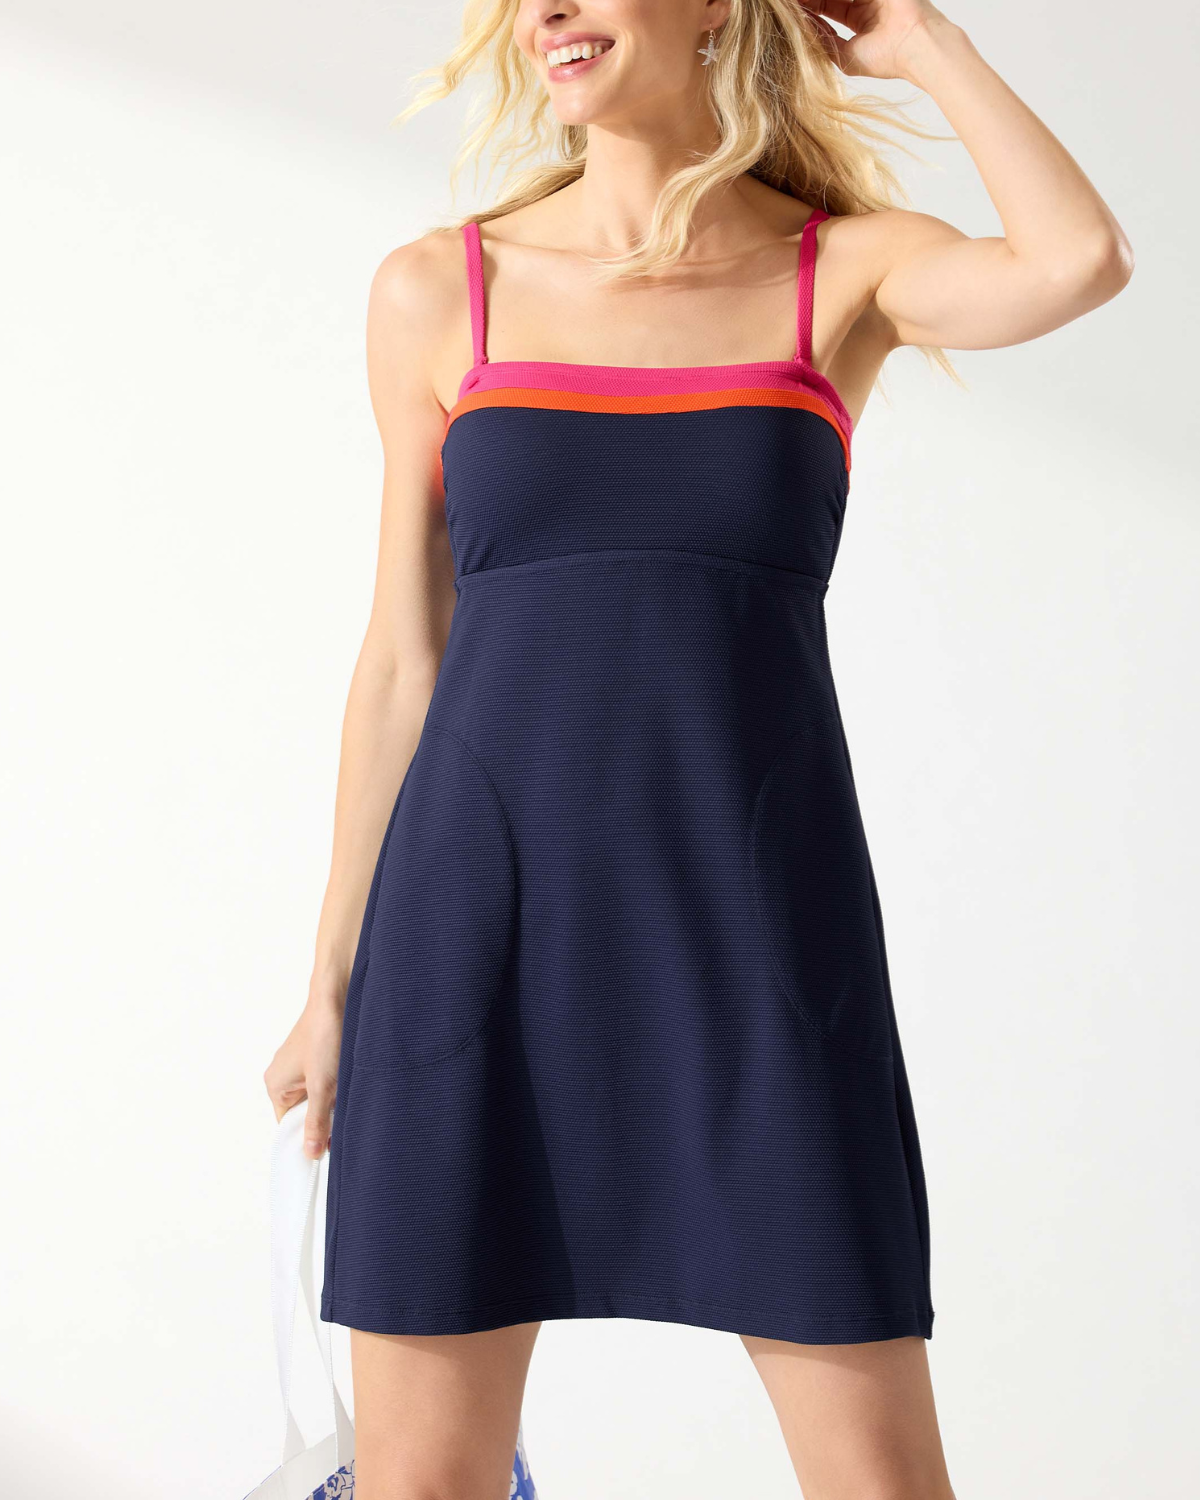 Model wearing a strapless bandeau spa dress with pockets in navy with a pink and orange stripe on the neckline